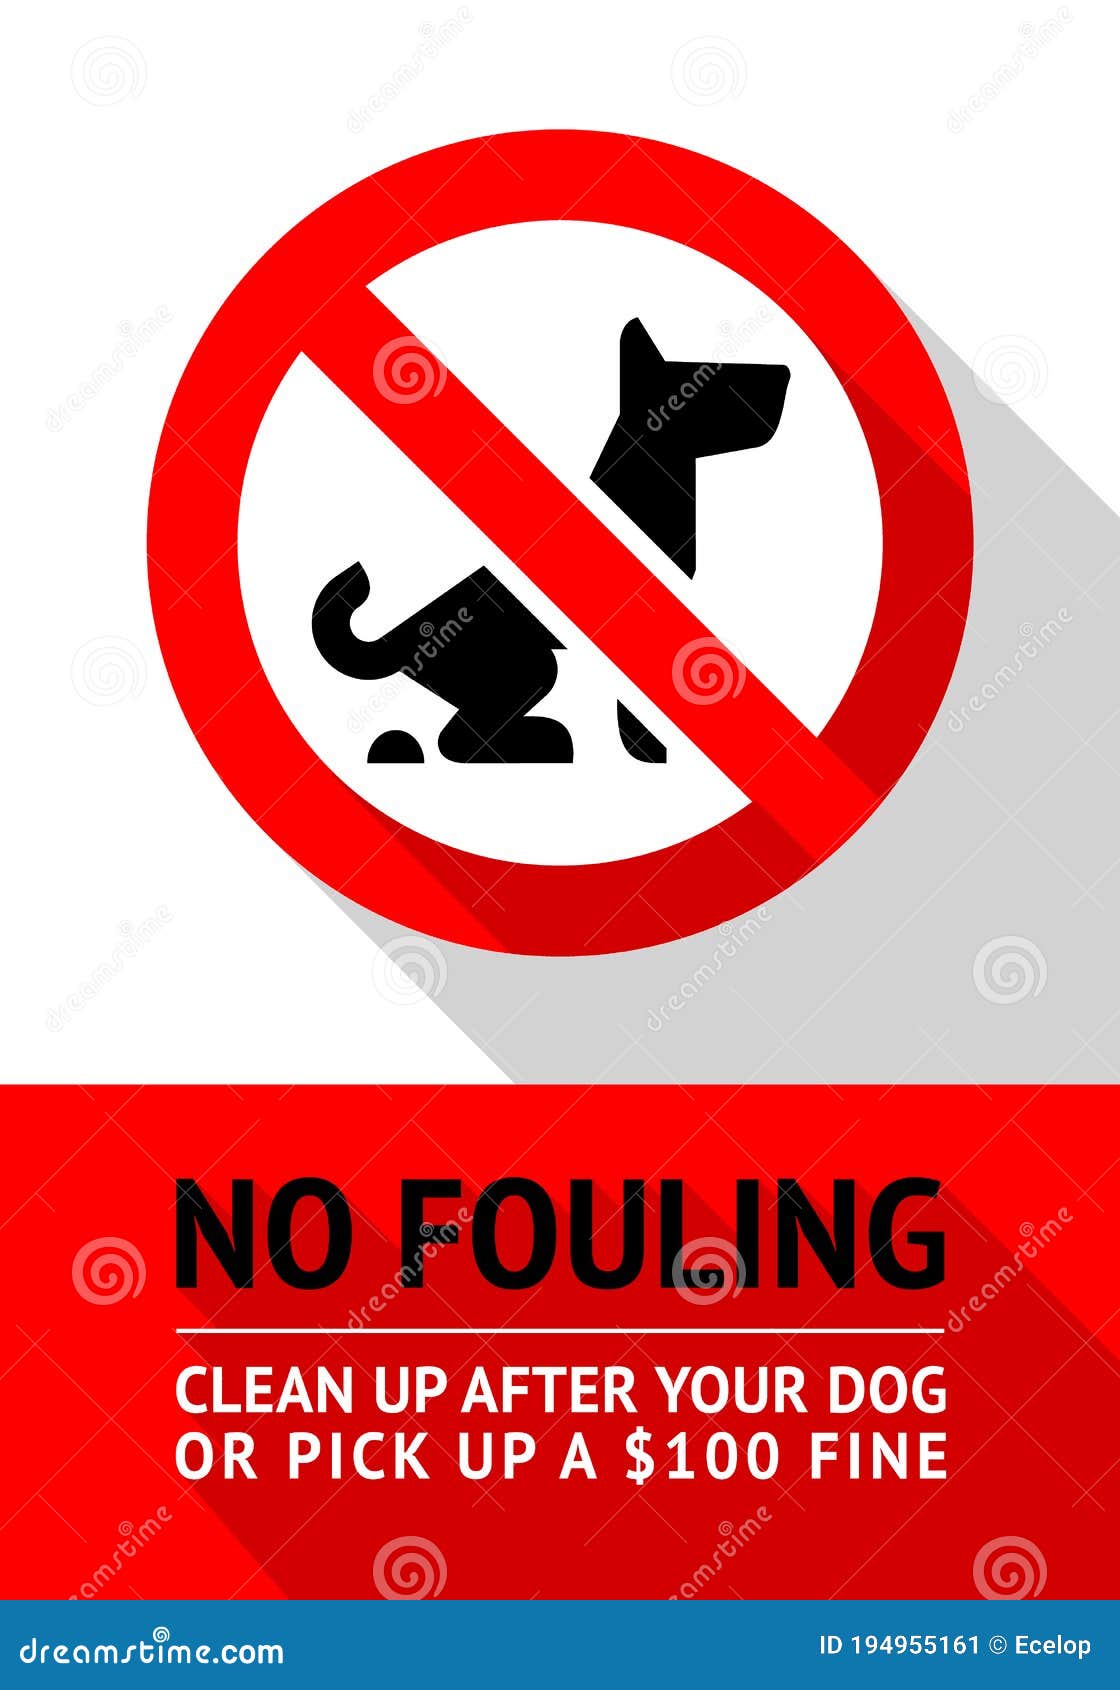 Dog mess Clean Up After Your Dog Warning Stickers Dog Fouling Dog Poo 